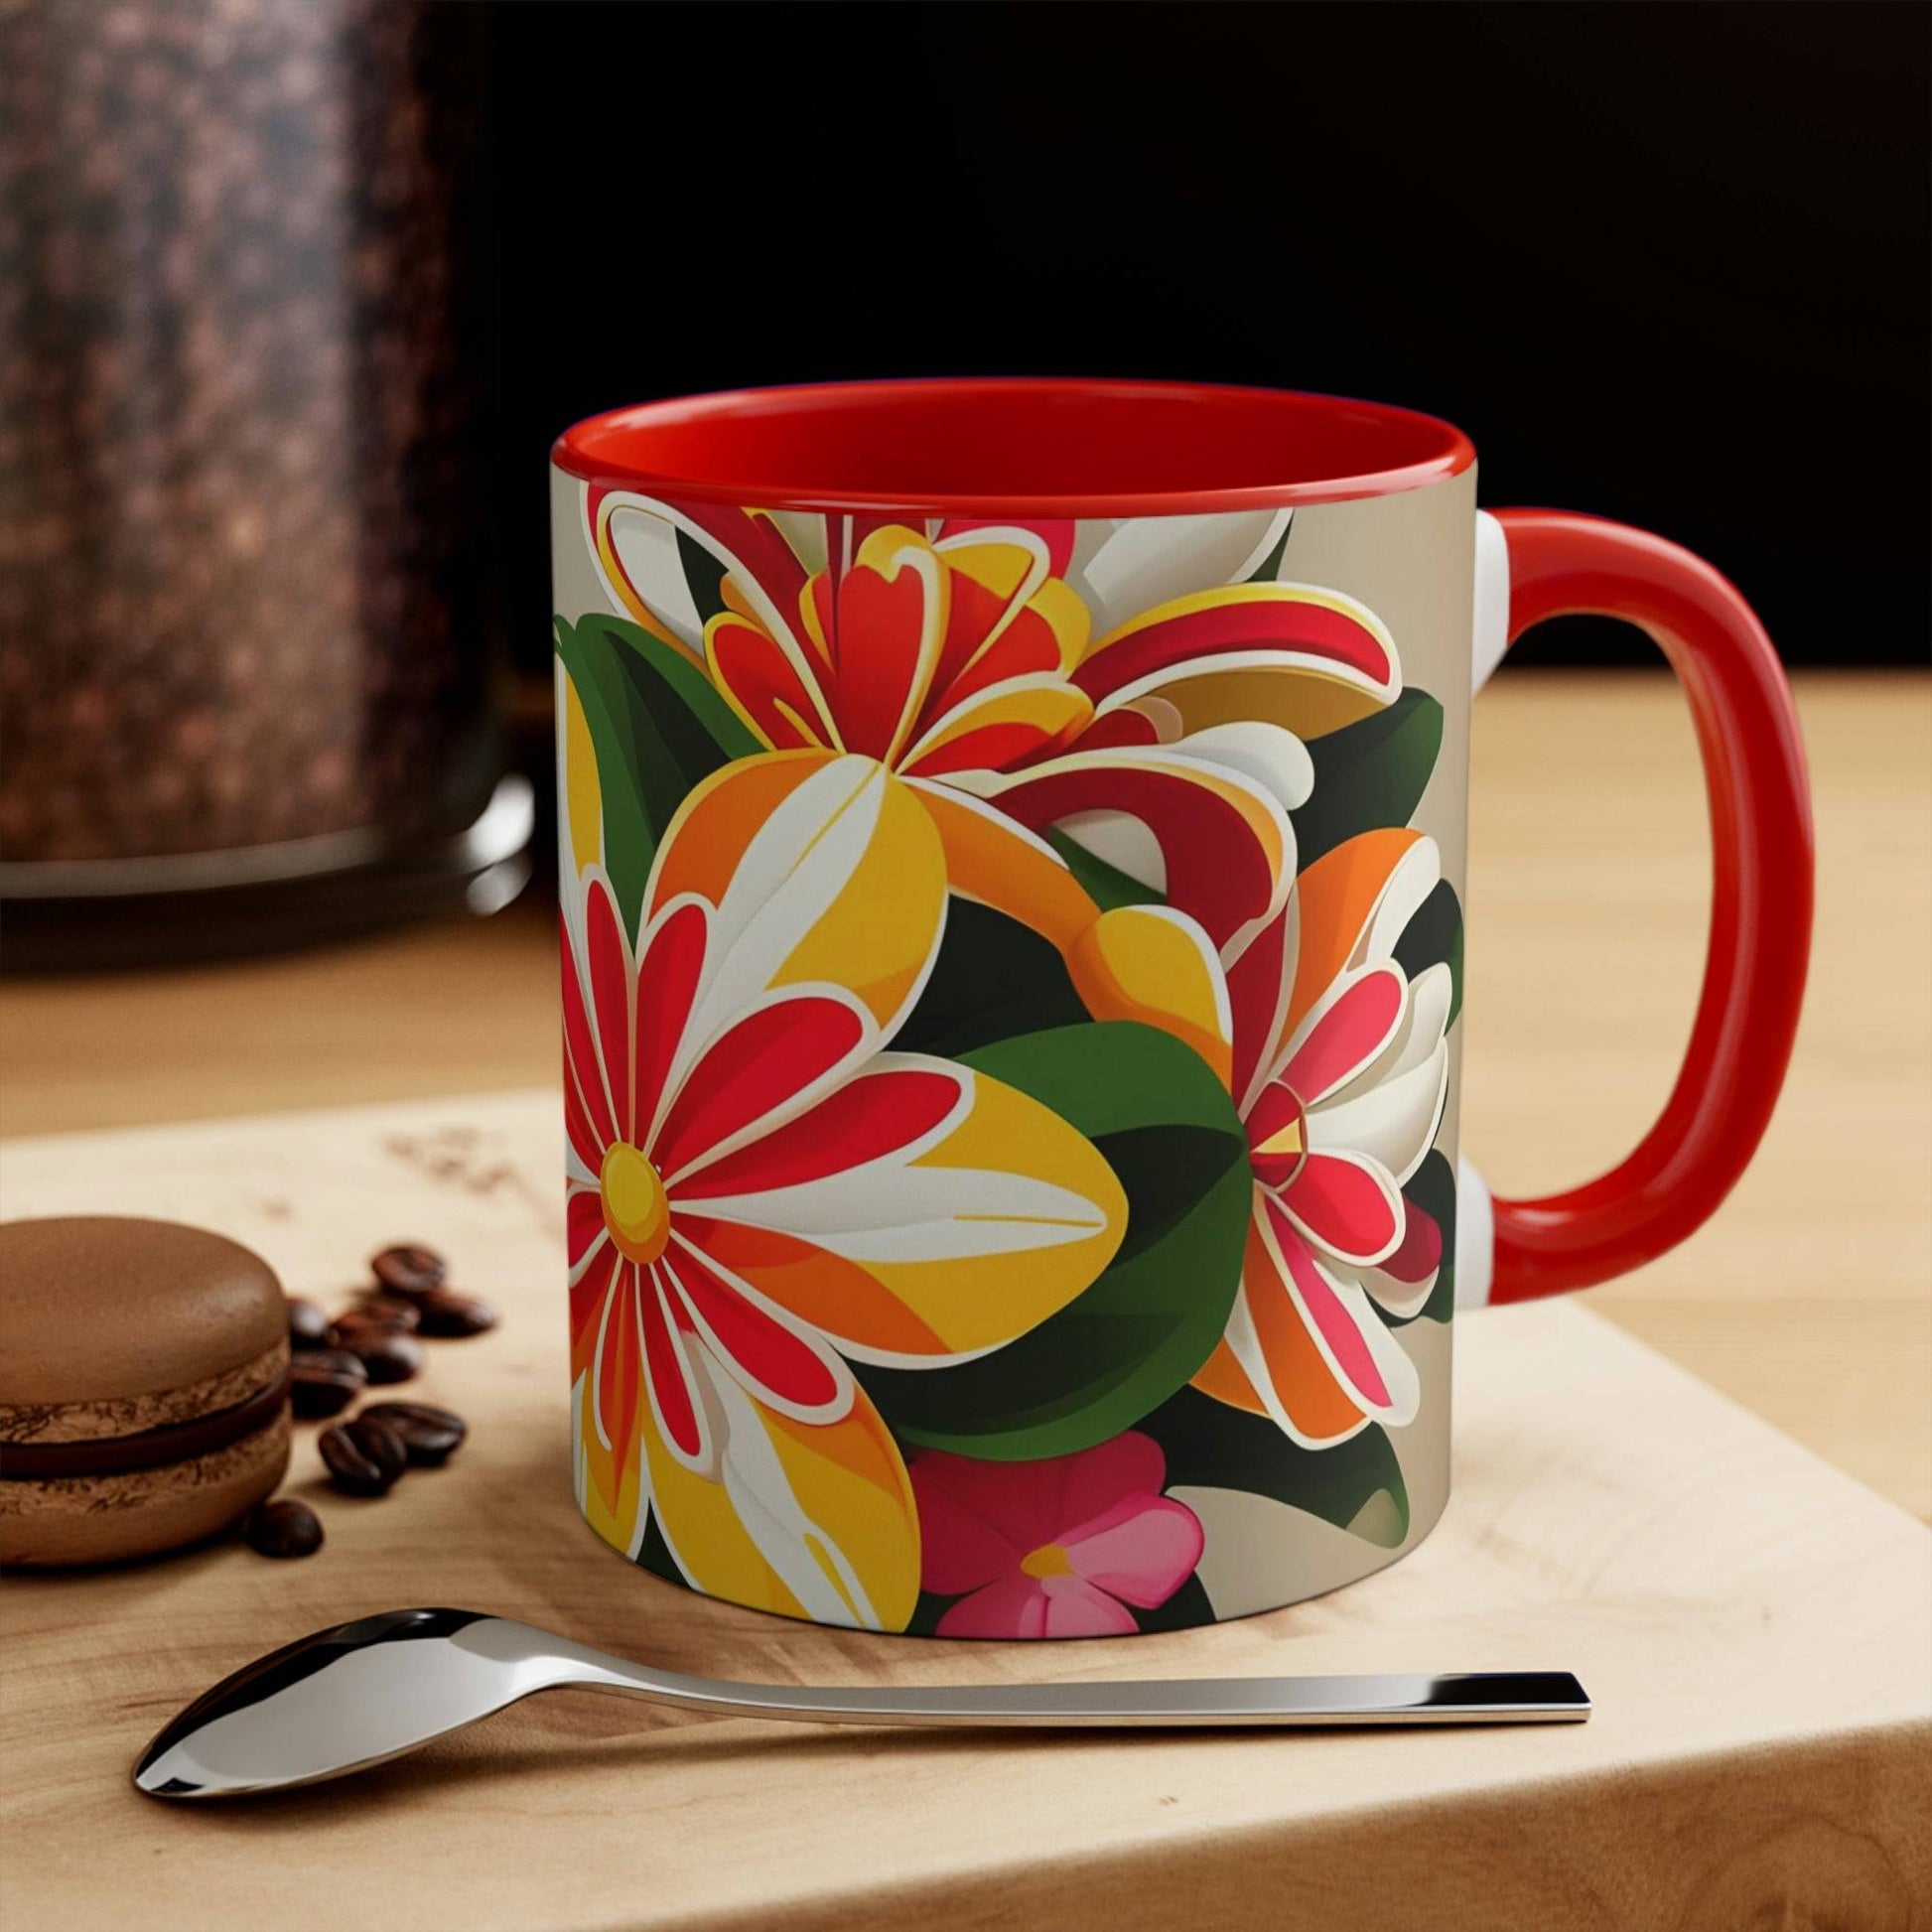 Ceramic Mug for Coffee, Tea, Hot Cocoa. Home/Office, Vibrant Bouquet of Wildflowers